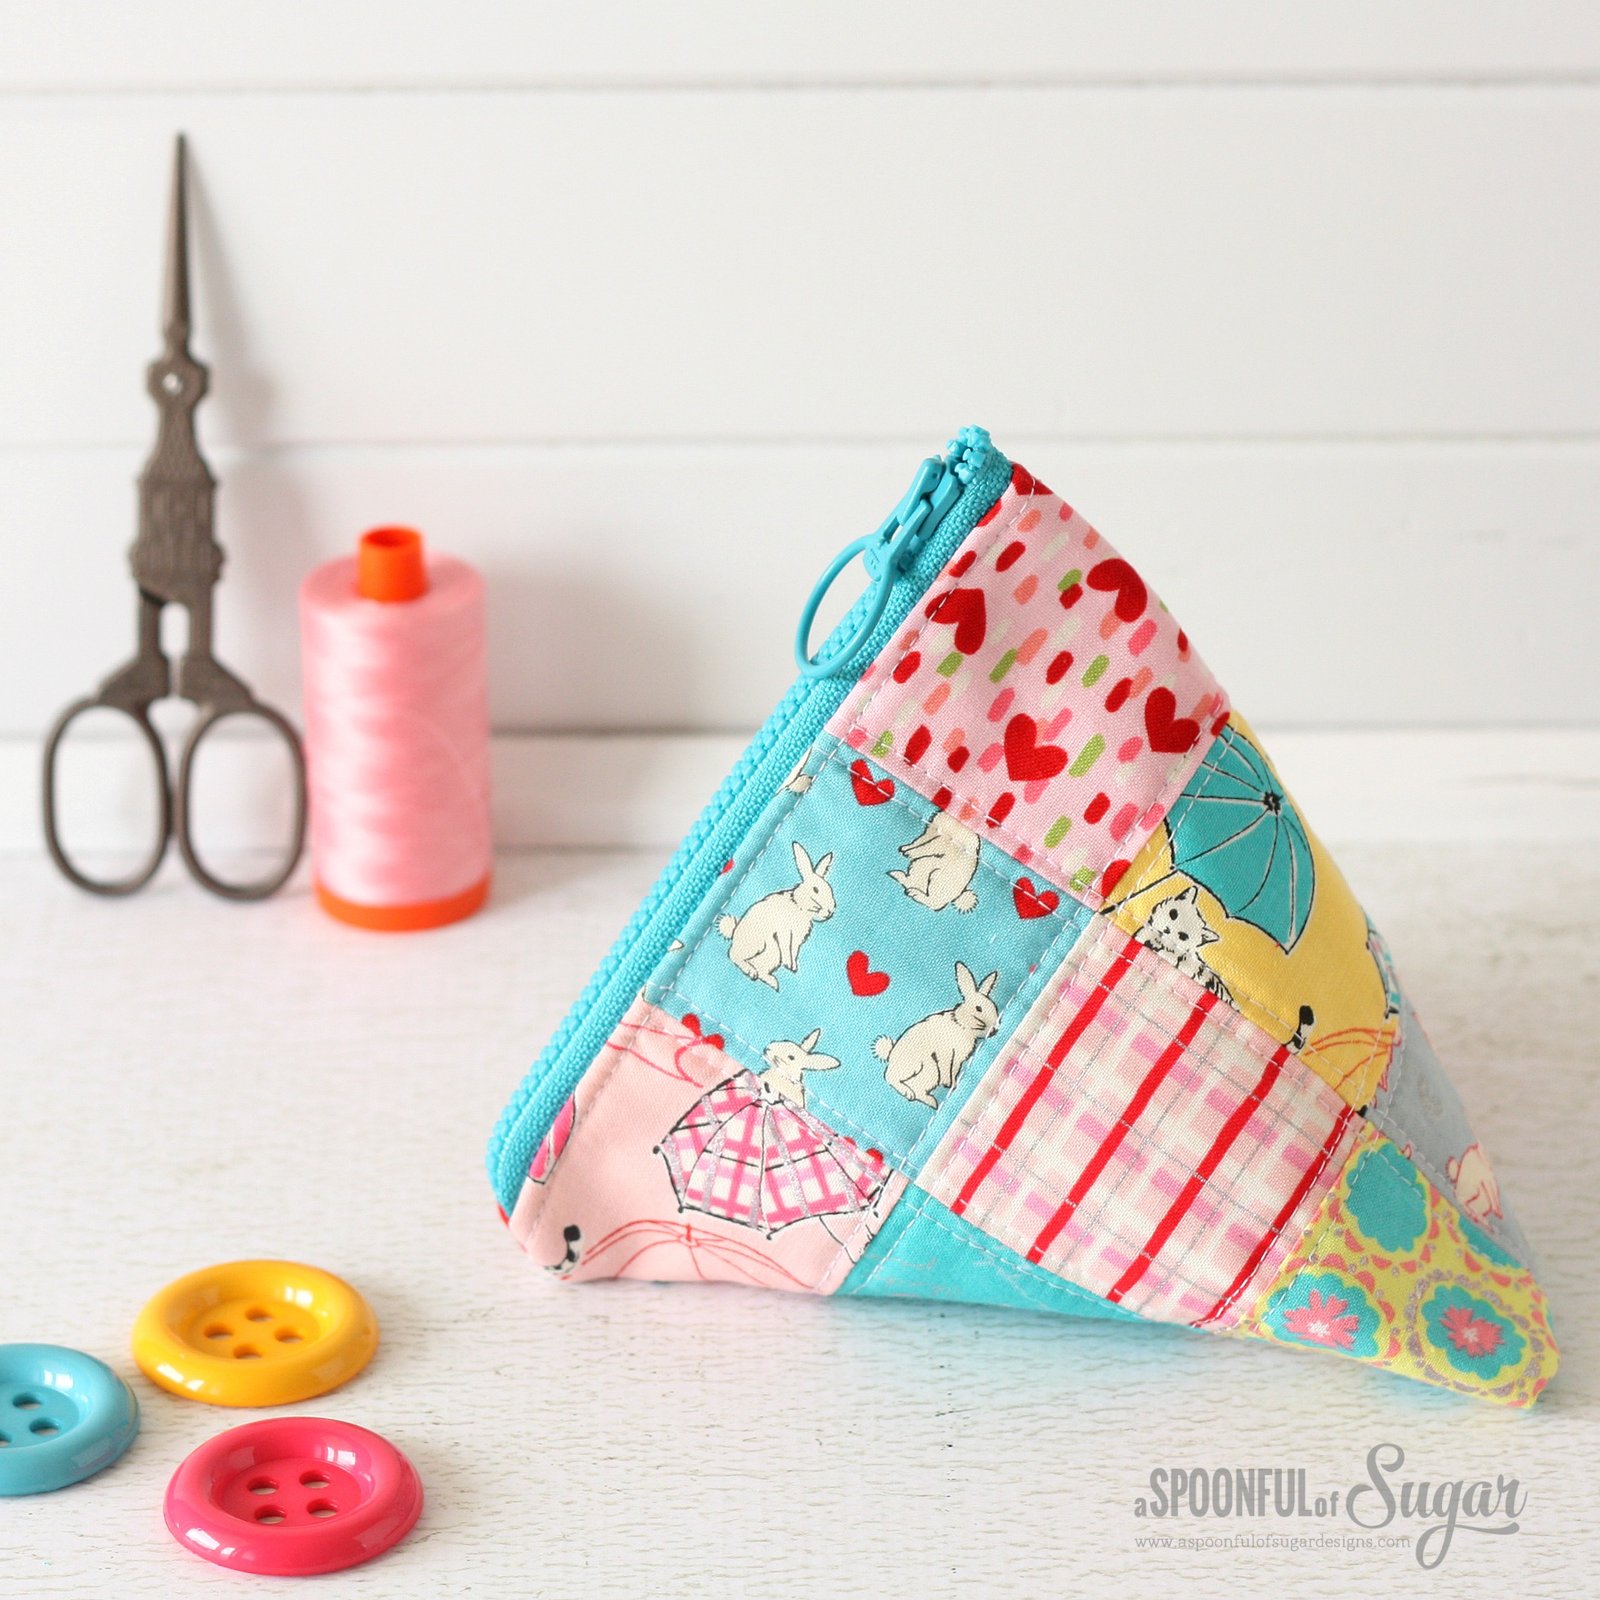 Patchwork Triangle Pouch - Top Sewing Tutorials from 2016 - A Spoonful of Sugar - www.aspoonfulofsugardesigns.com